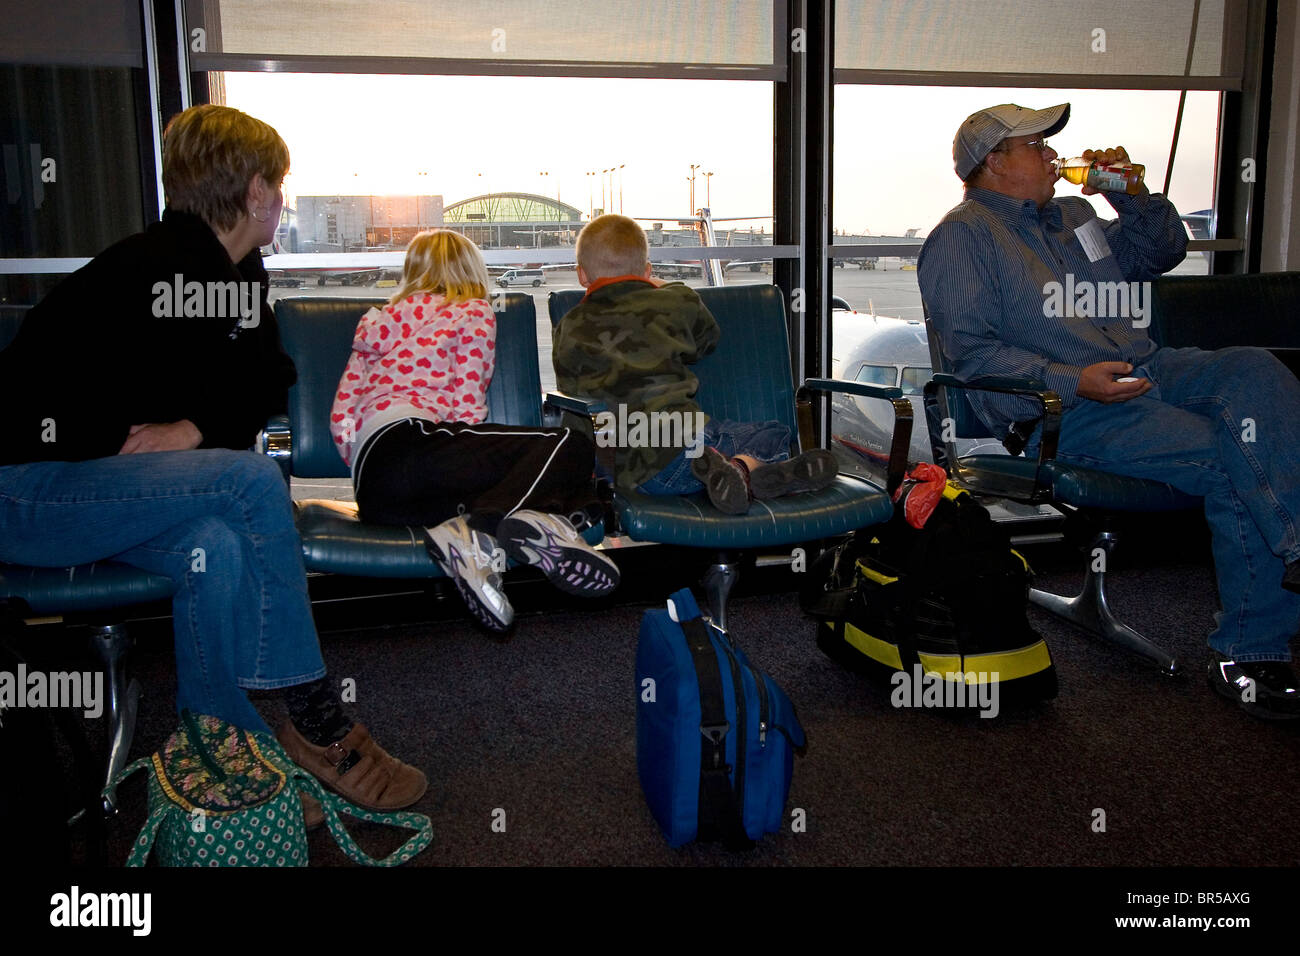 Family of four in airport waiting for their flight at the gate window at sunrise Stock Photo